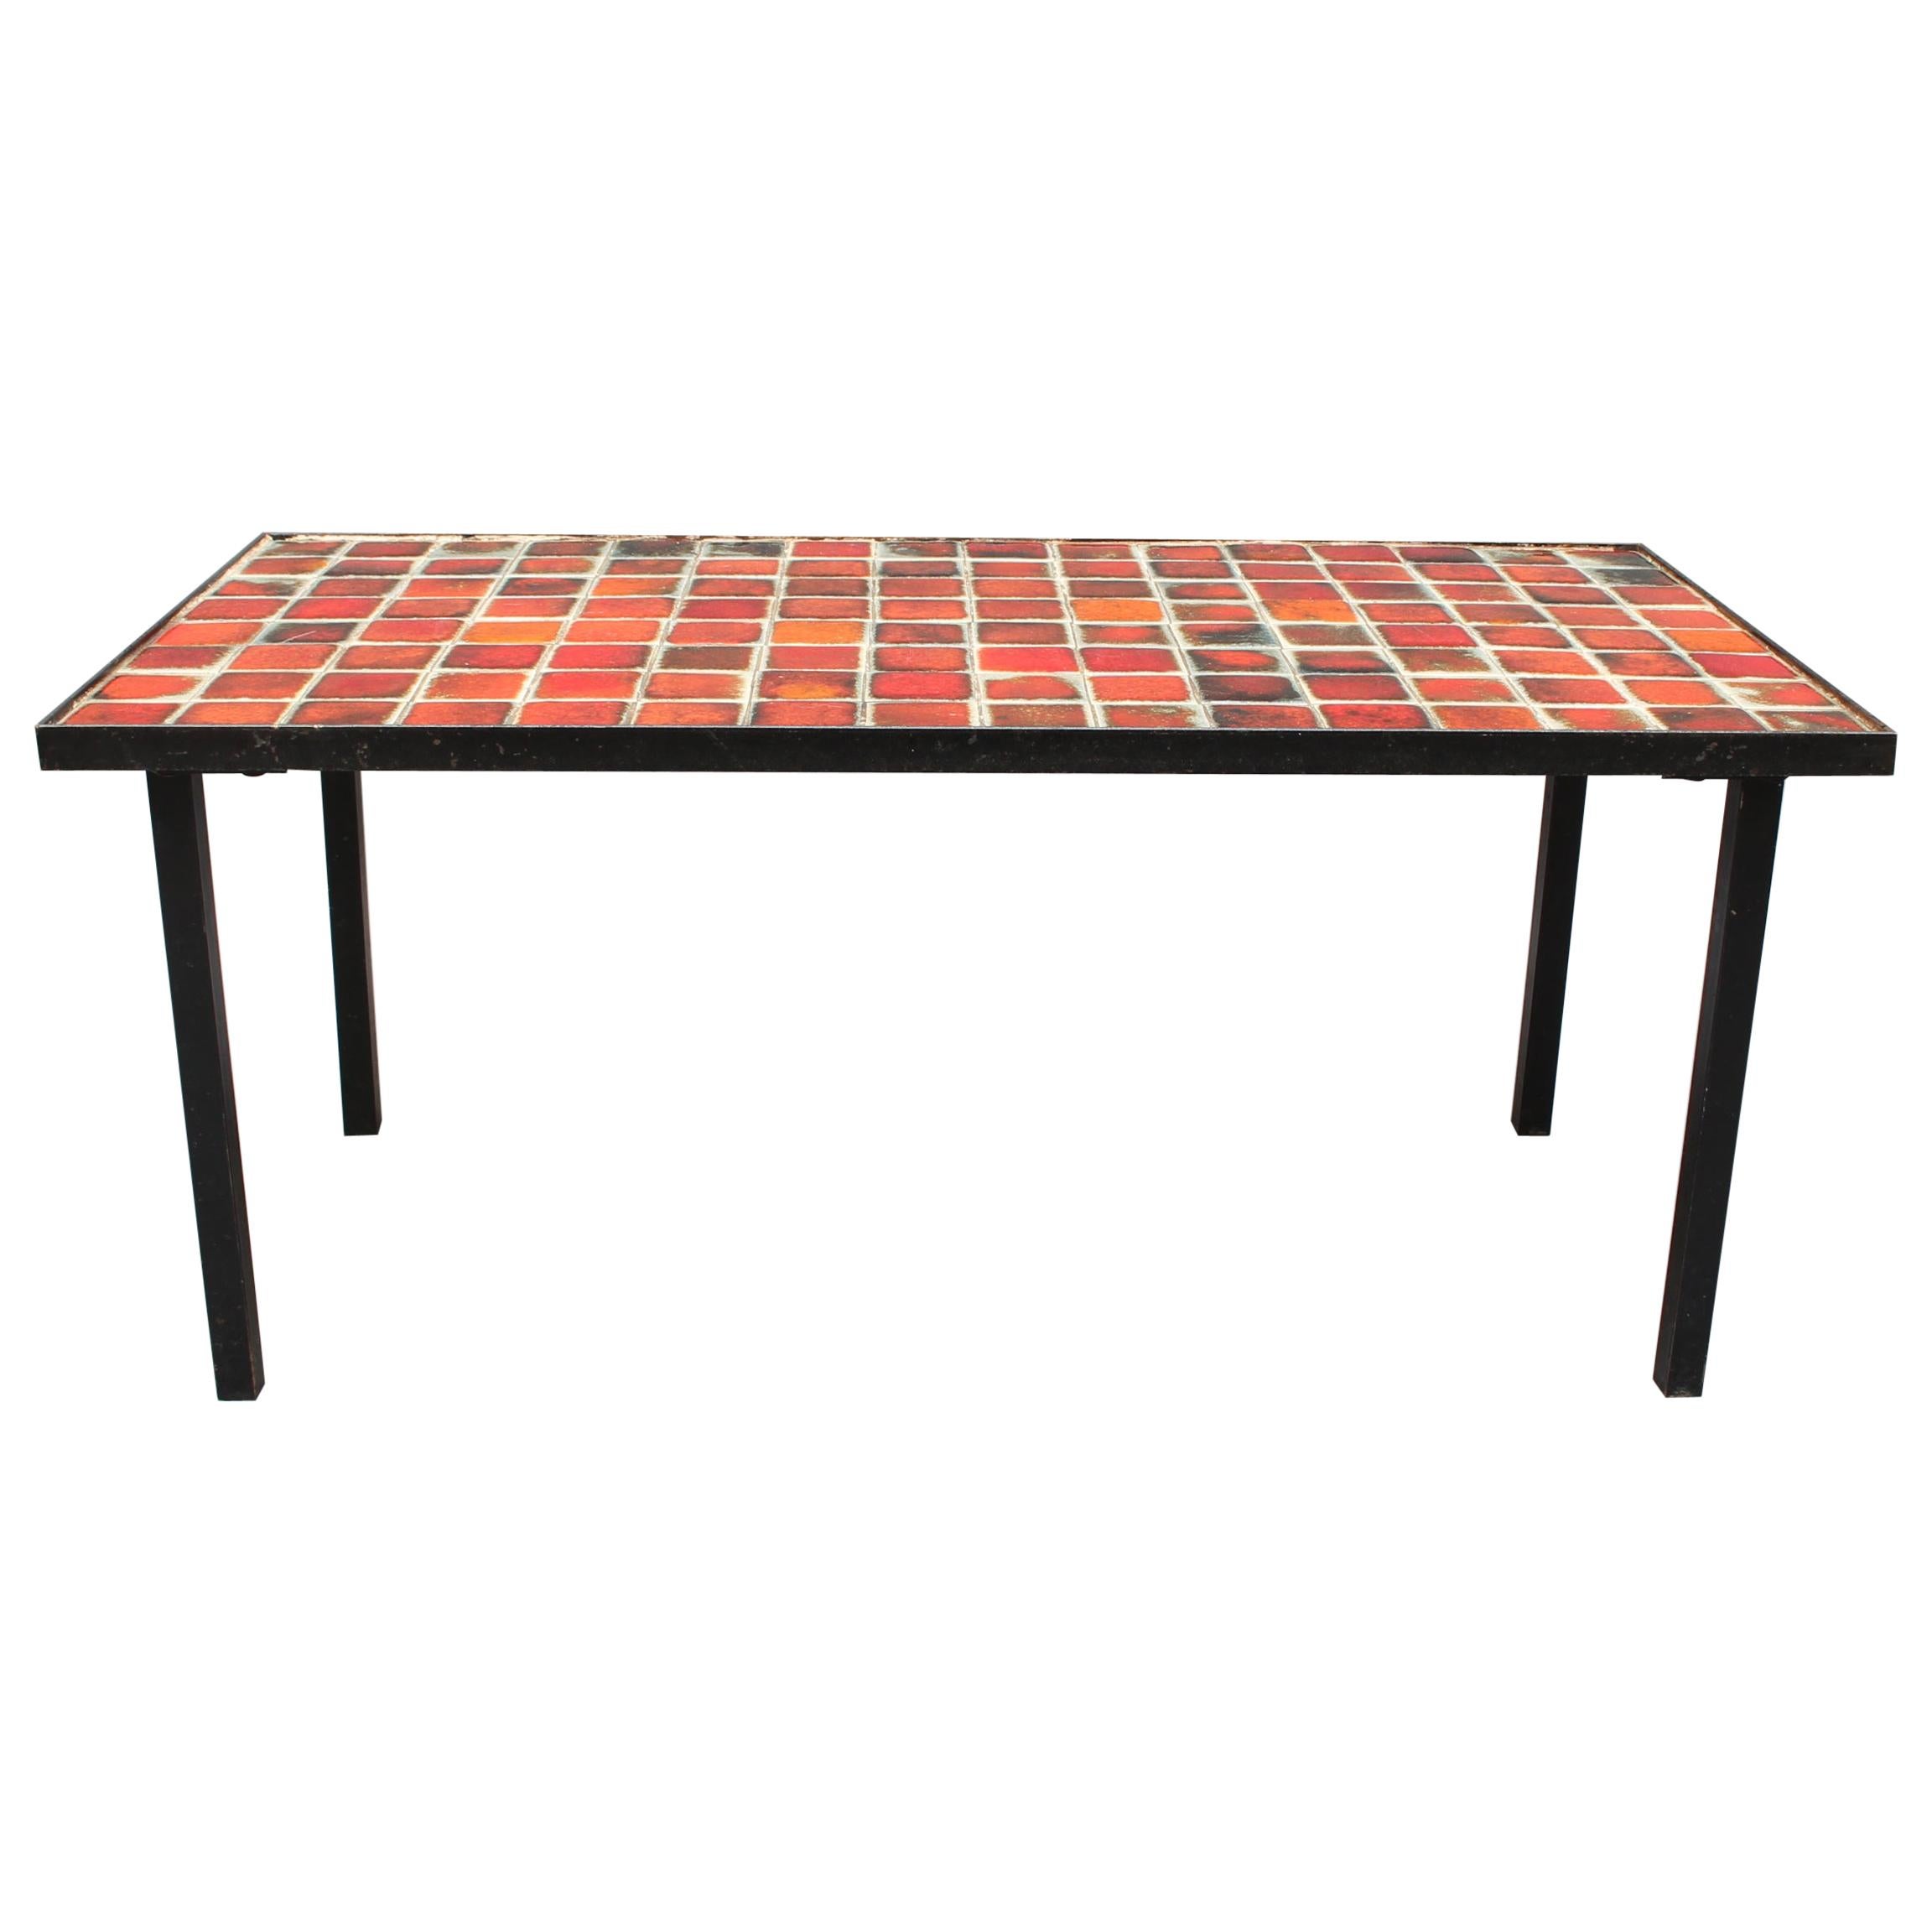 Ceramic Low Table with Red-Hued Tiles by Mado Jolain 'circa 1950s'